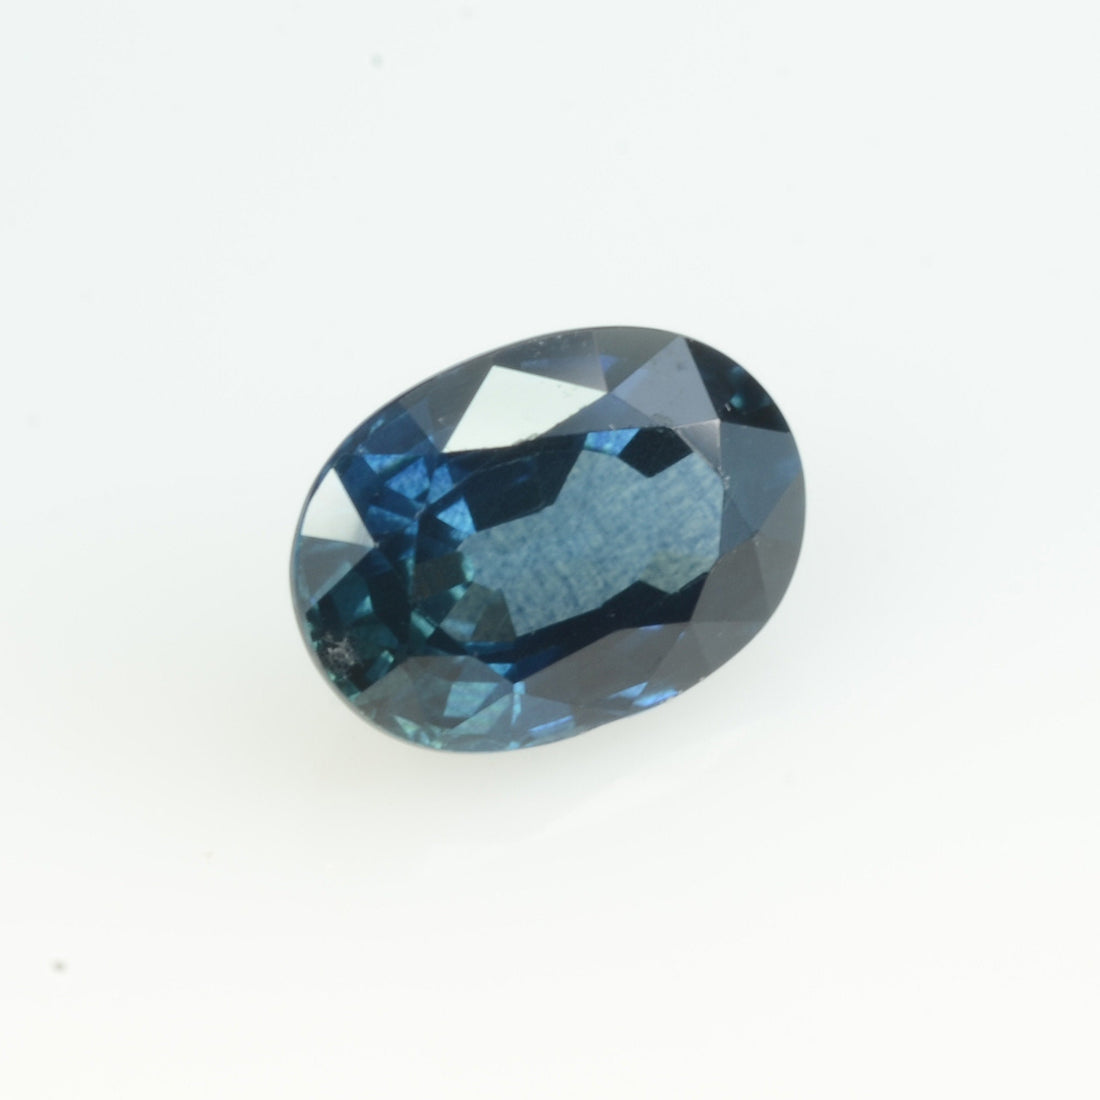 0.88 cts Natural Blue Sapphire Loose Gemstone Oval Cut